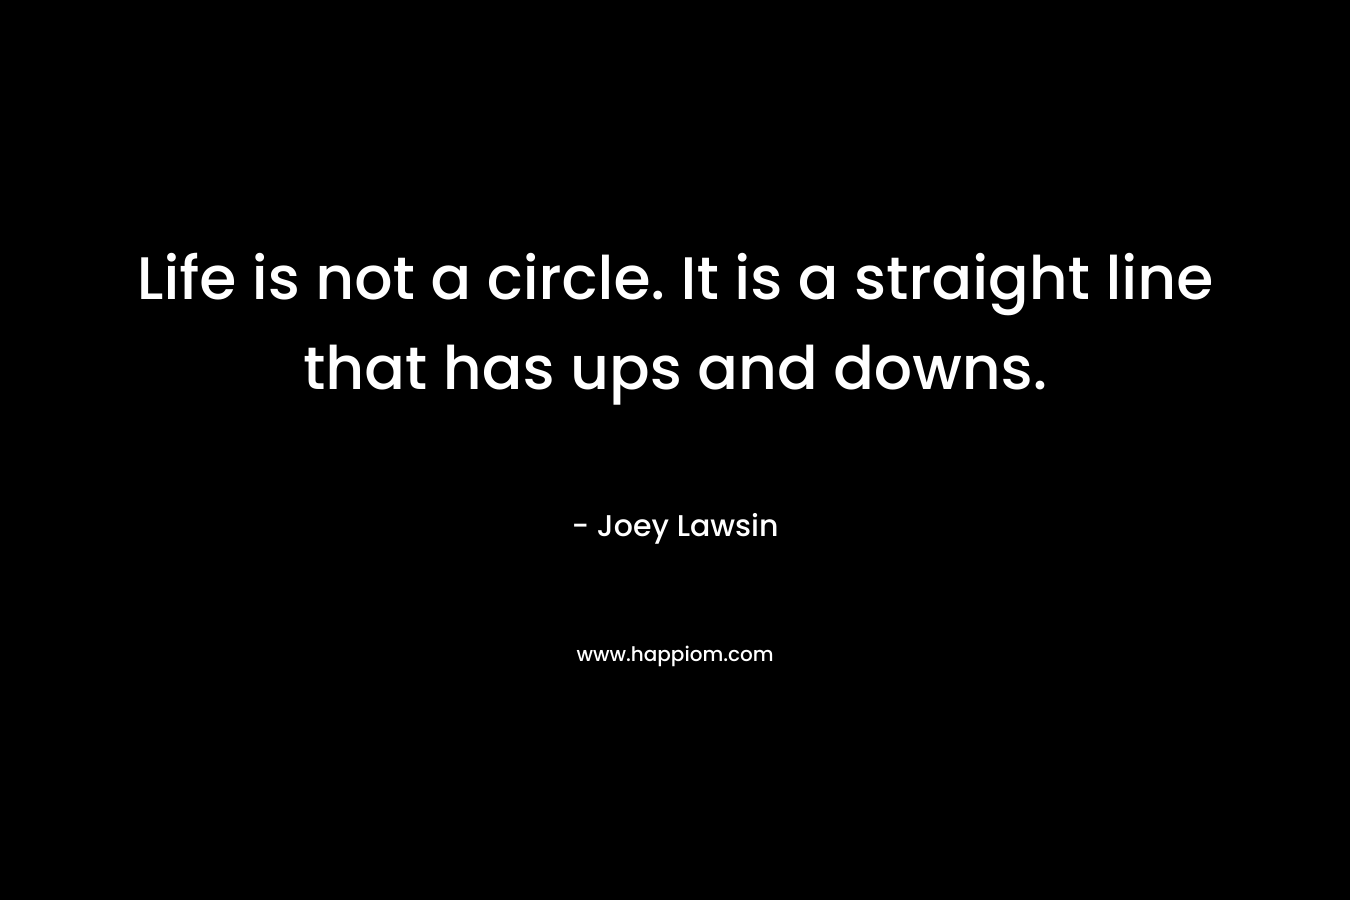 Life is not a circle. It is a straight line that has ups and downs.